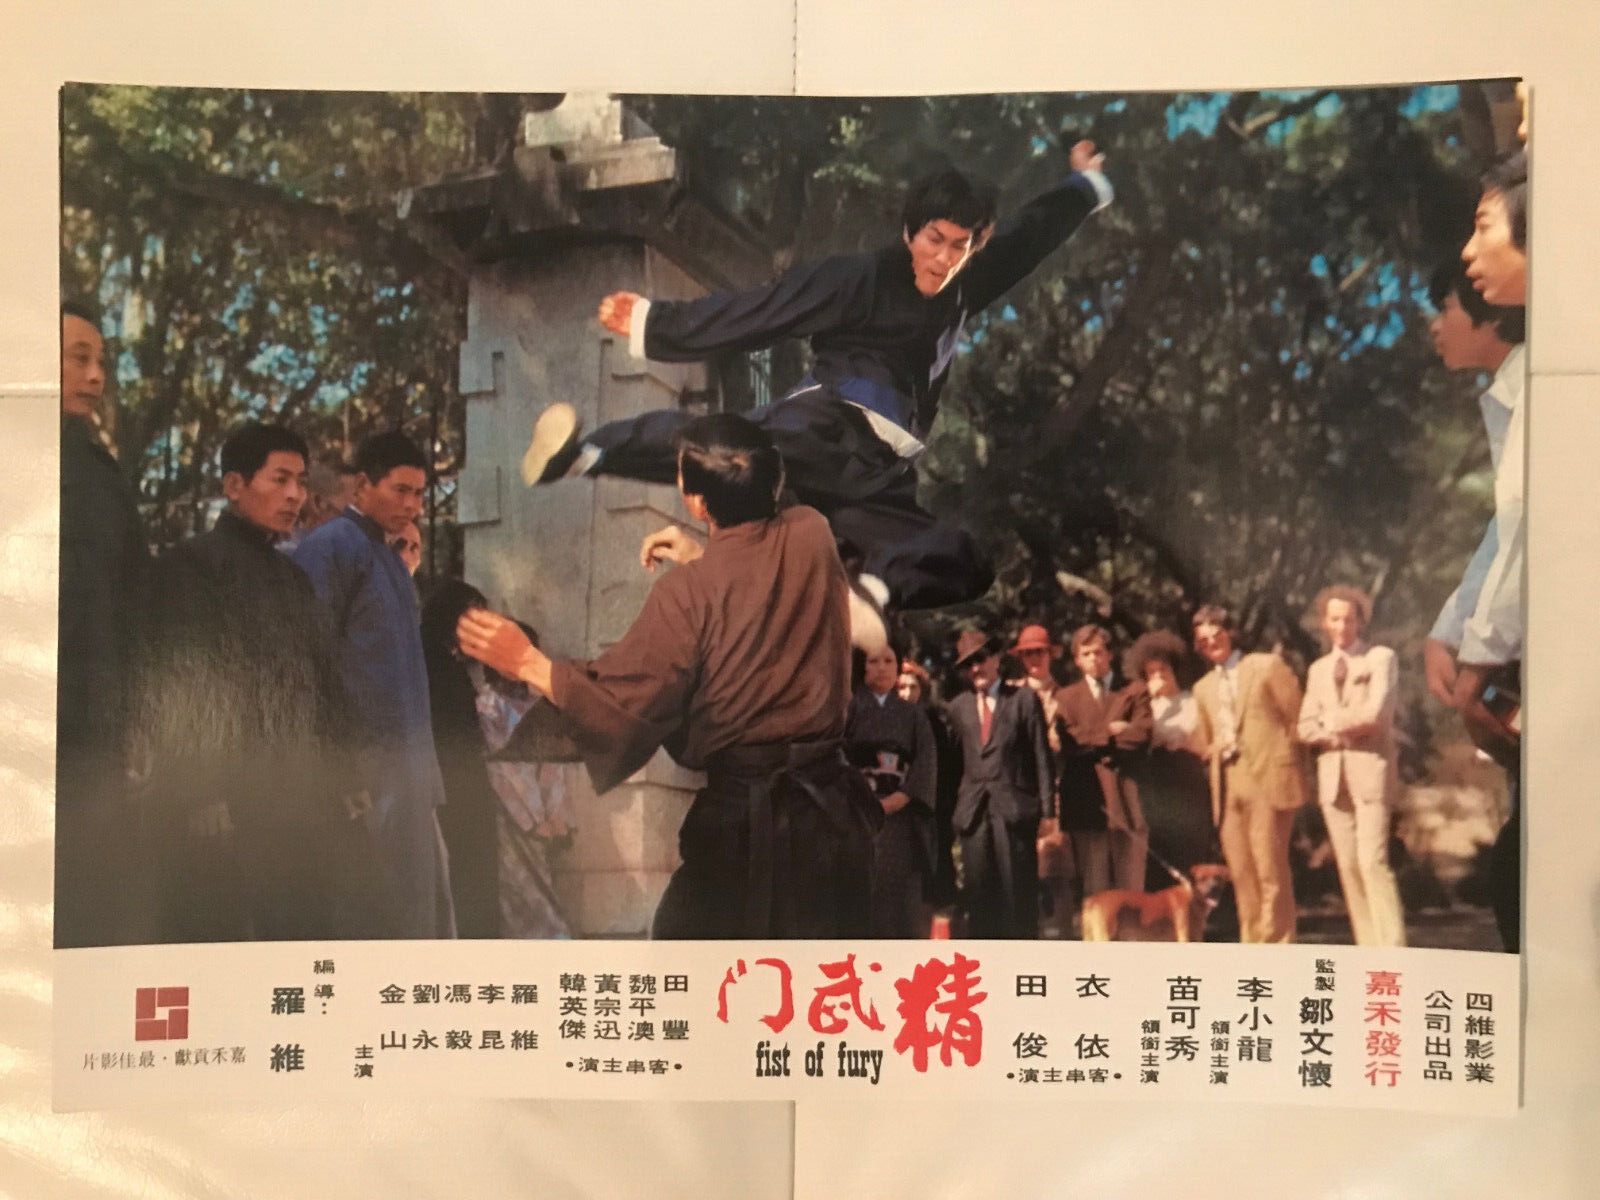 Bruce Lee - Fist of Fury Lobby Card - 1980's version by Golden Harvest